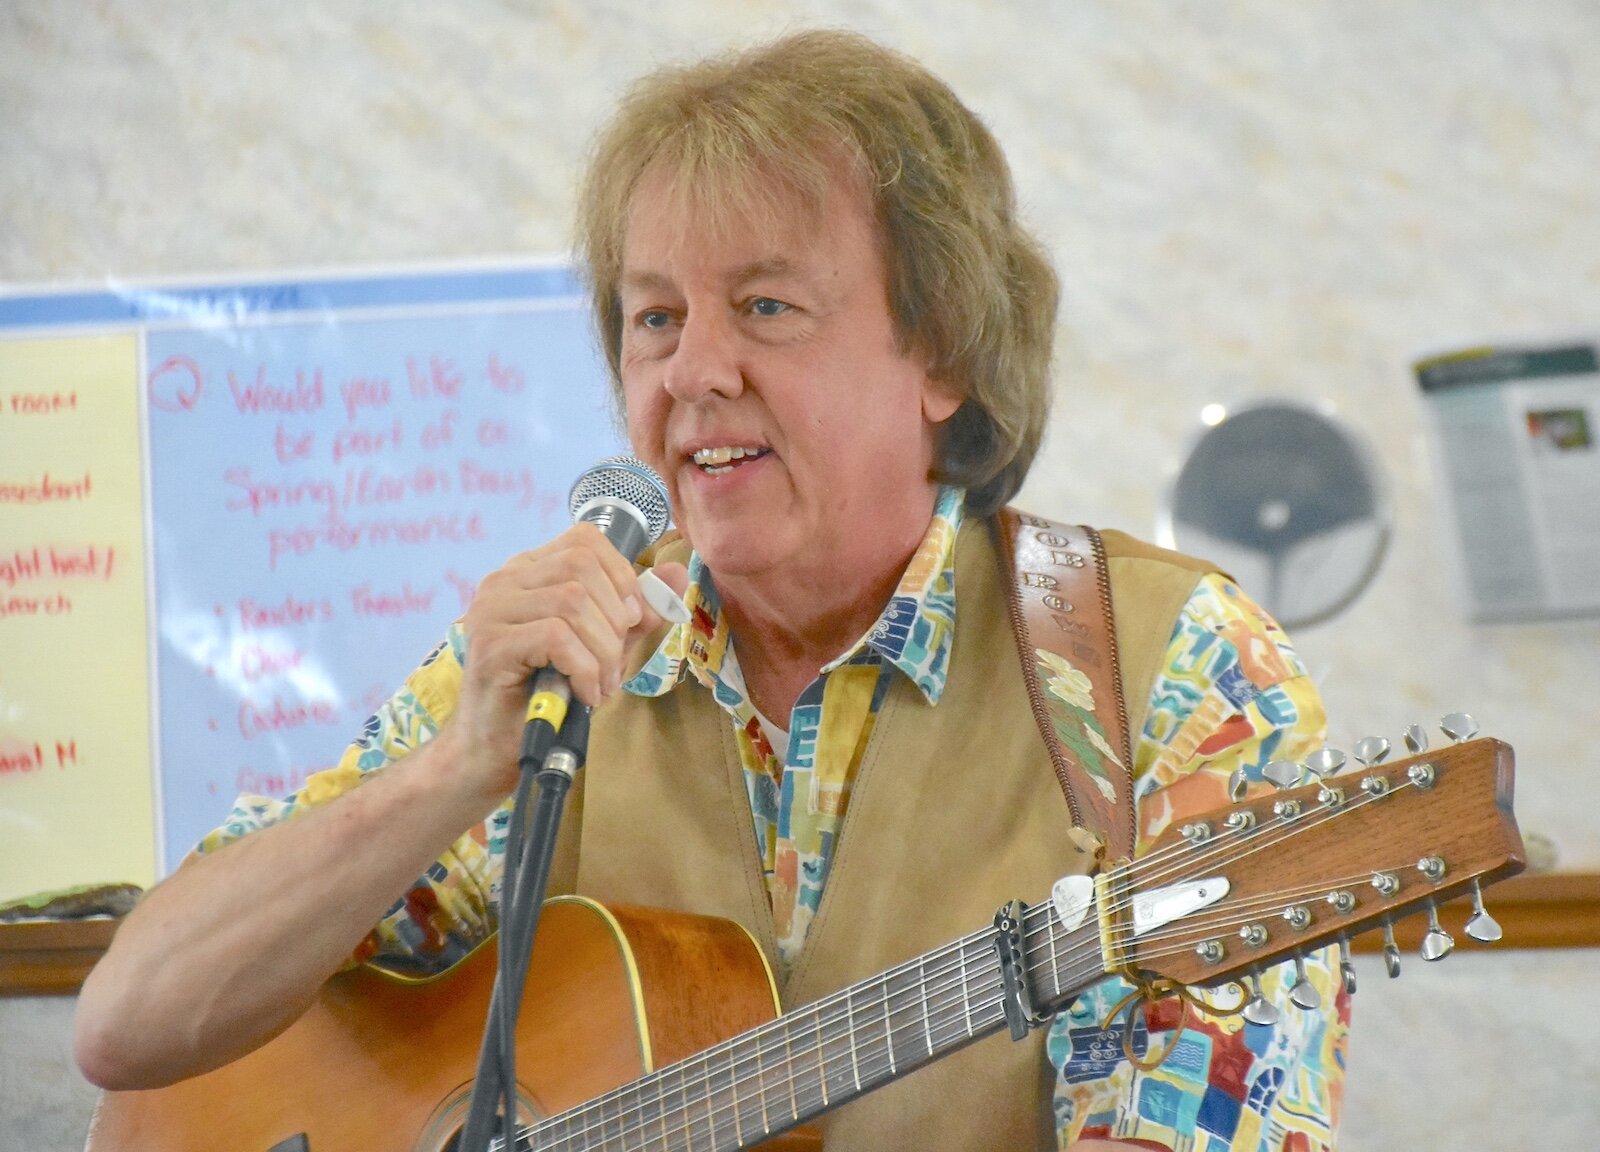 Bob Rowe has been performing at nusing homes and assistaed living facilities for over 40 years.